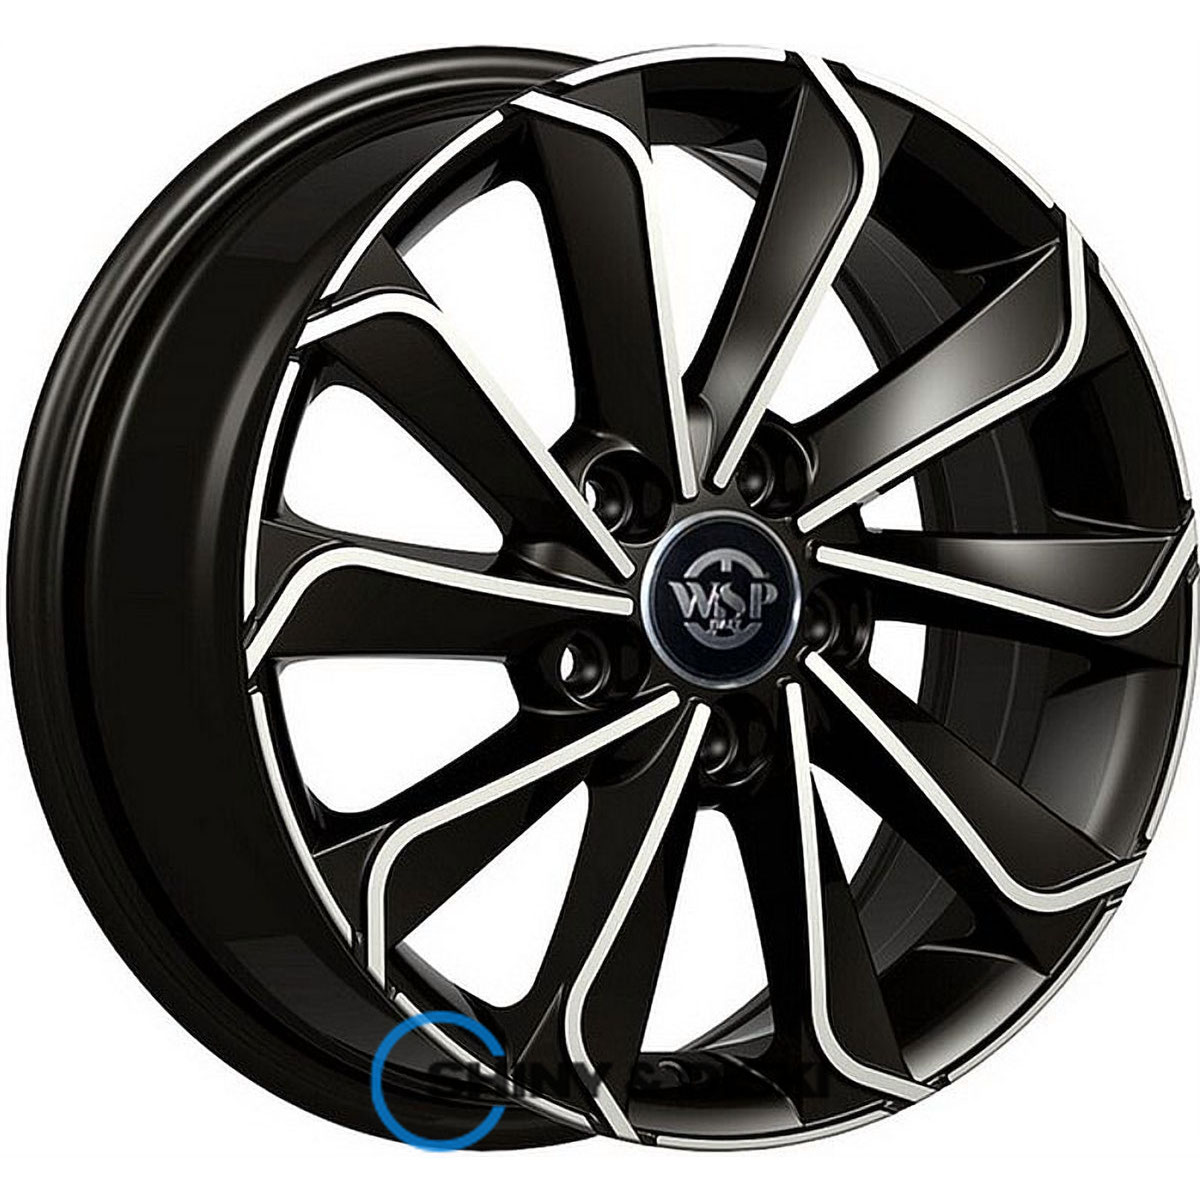 wsp italy volkswagen wd003 corinto glossy black polished r16 w6.5 pcd5x112 et46 dia57.1